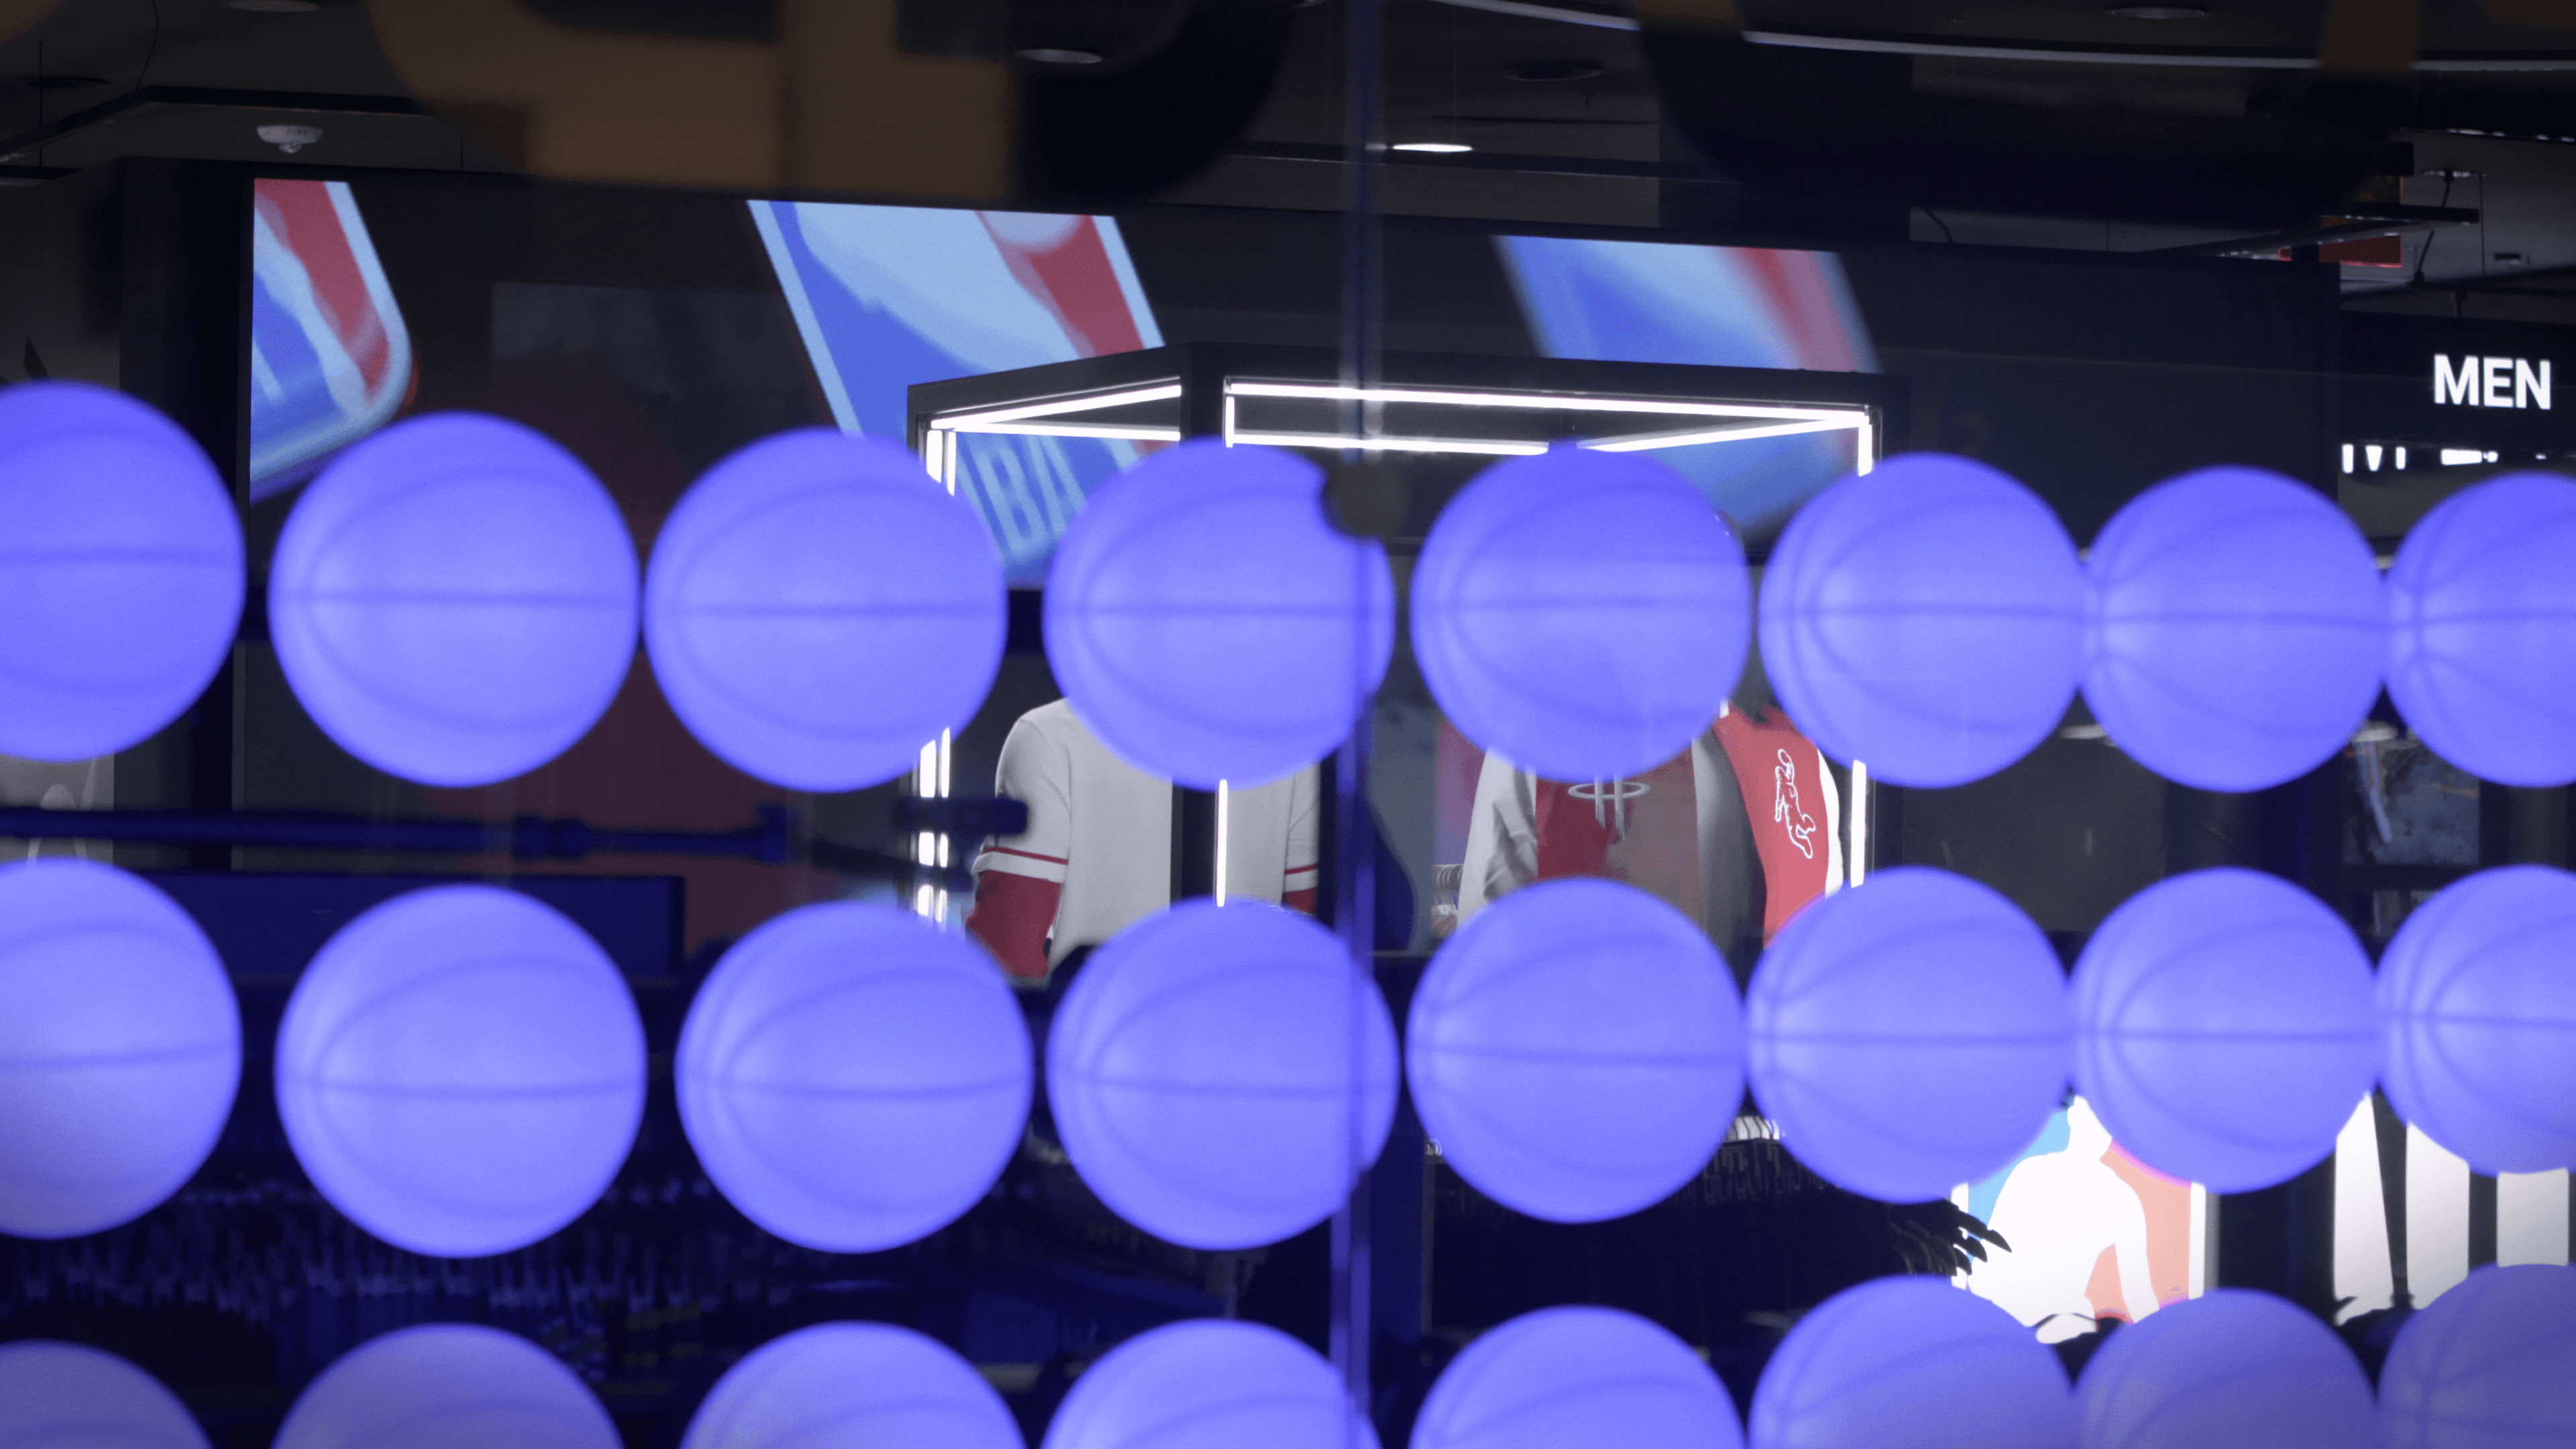 Detail view of the reactive LED basketball display.